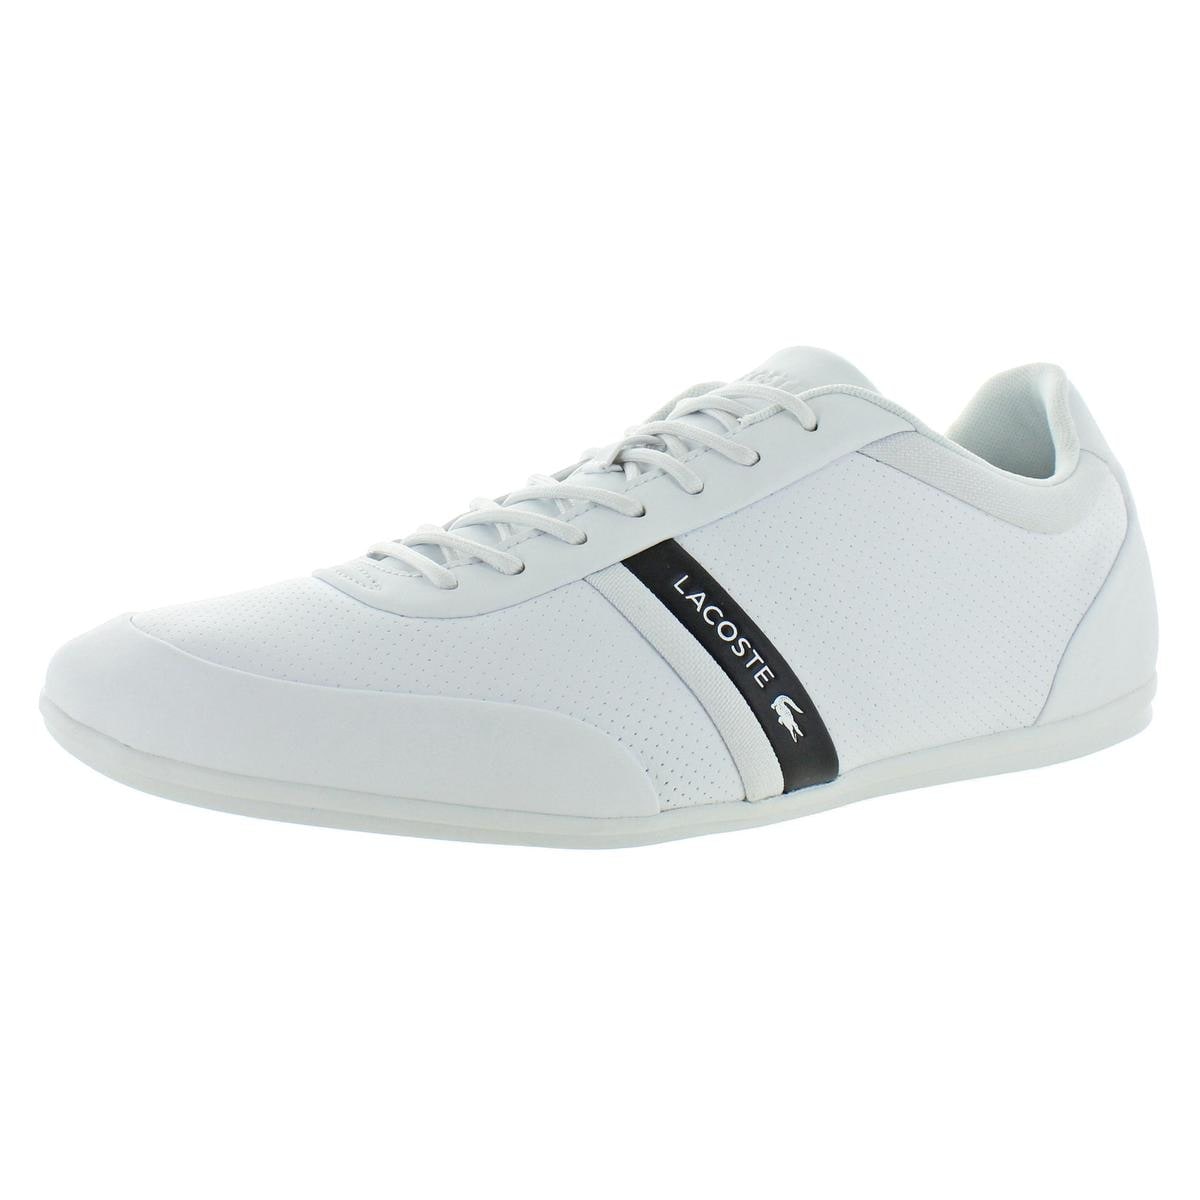 men's storda leather trainers